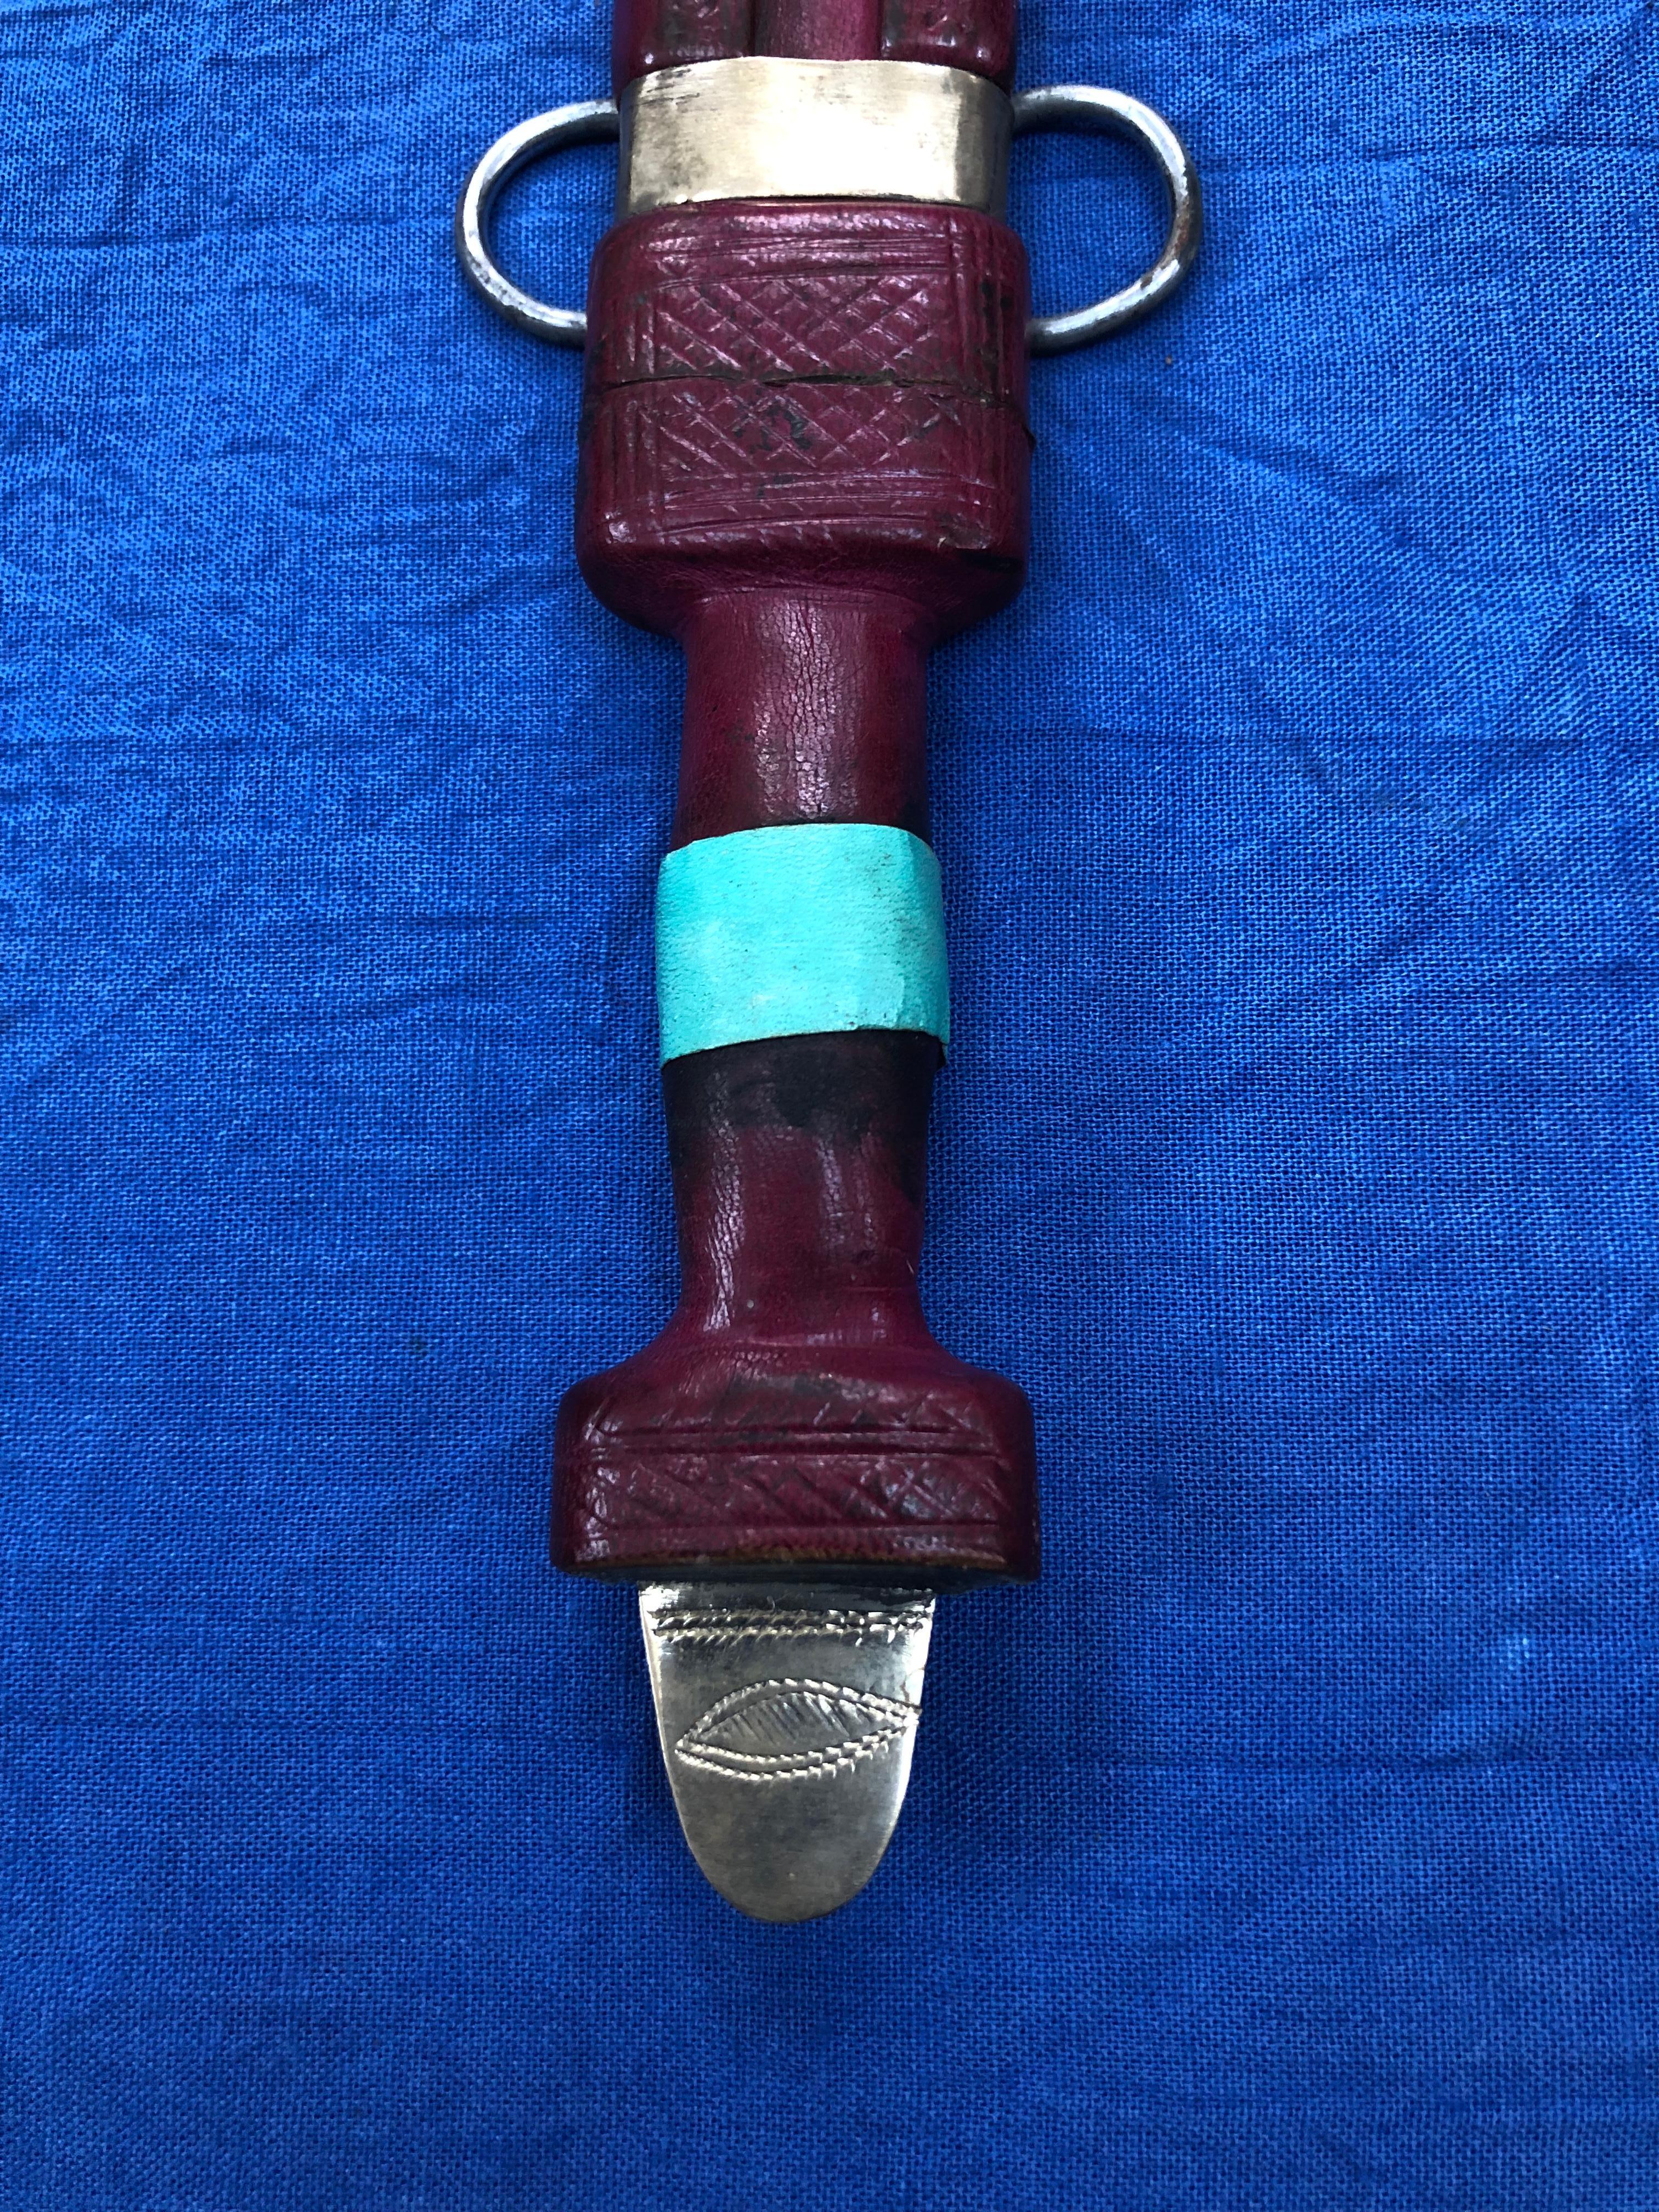 Handmade Vintage Moroccan Tuareg Dagger - Etched Silver, Stamped Leather  In Good Condition For Sale In Vineyard Haven, MA